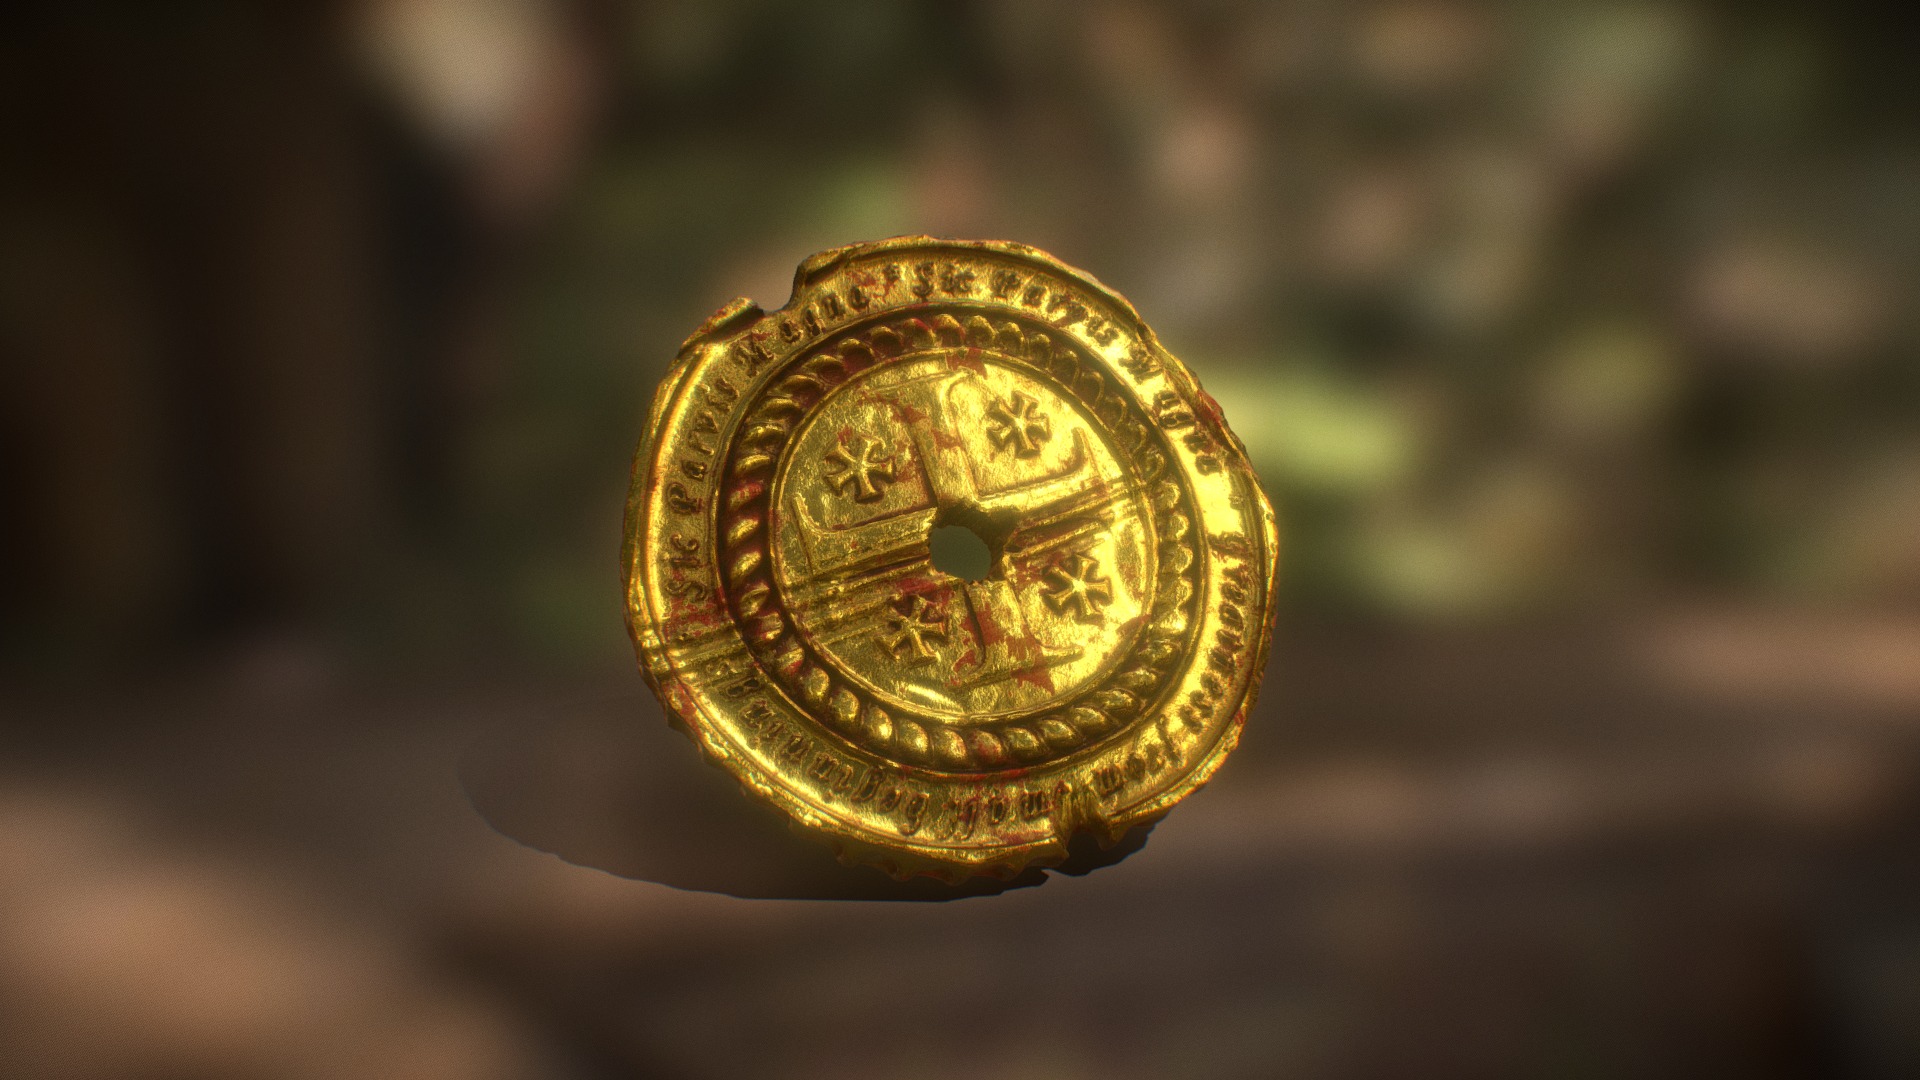 3D model Sic Parvis Magna old gold coin - This is a 3D model of the Sic Parvis Magna old gold coin. The 3D model is about a gold coin with a black background.